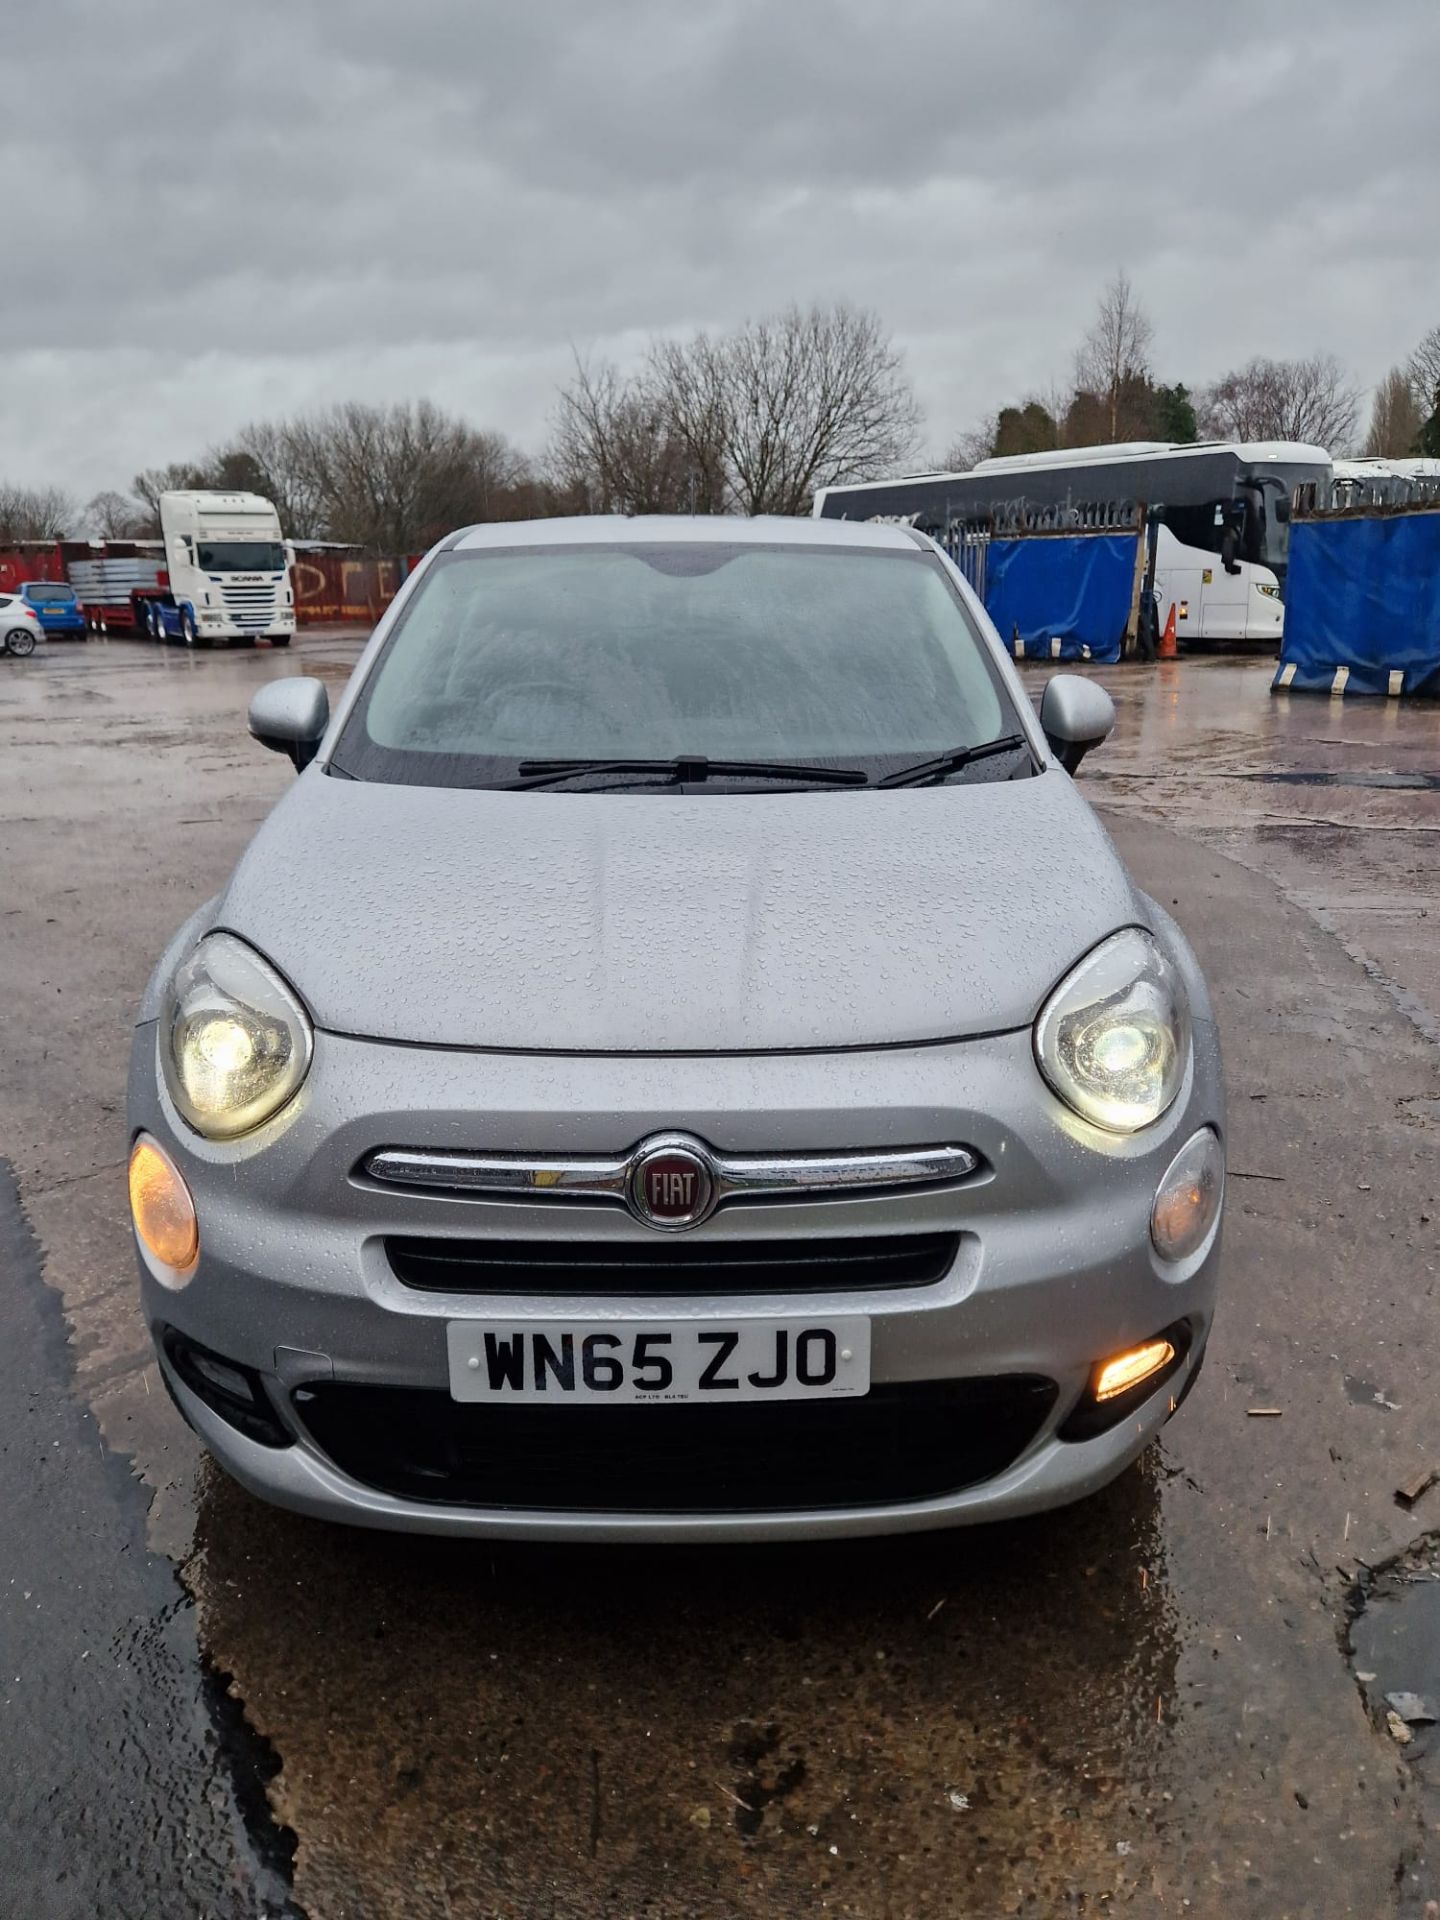 65 plate Fiat 500X Lounge multi air 1.4i, MOT until 1/10/2024, 84190 miles (unchecked), comes with 2 - Image 8 of 40